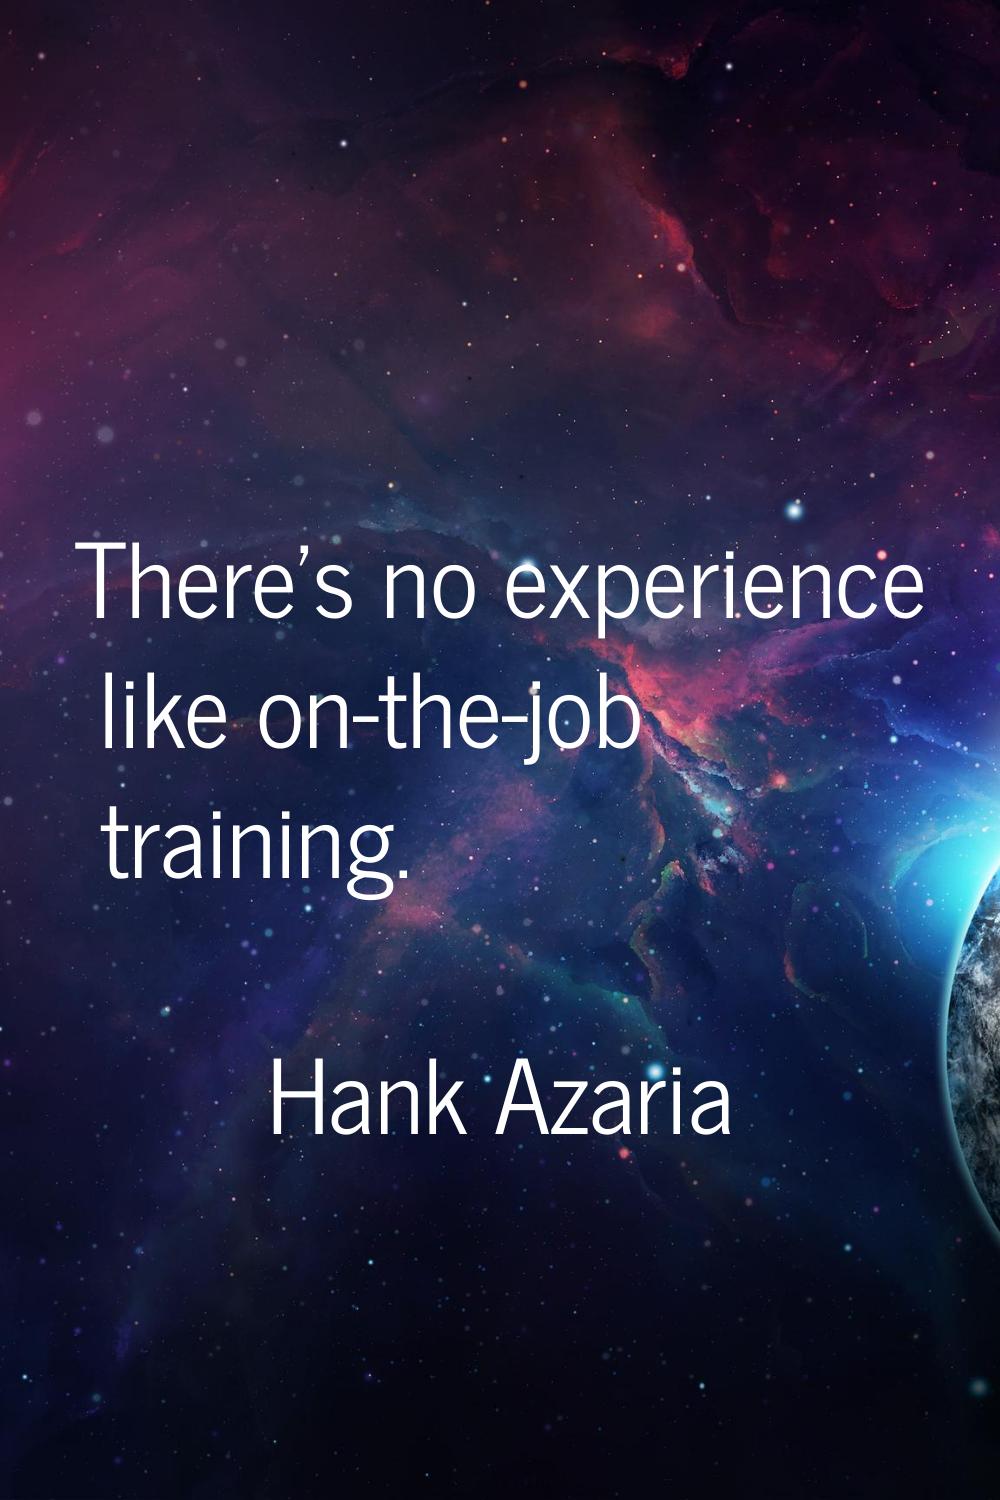 There's no experience like on-the-job training.